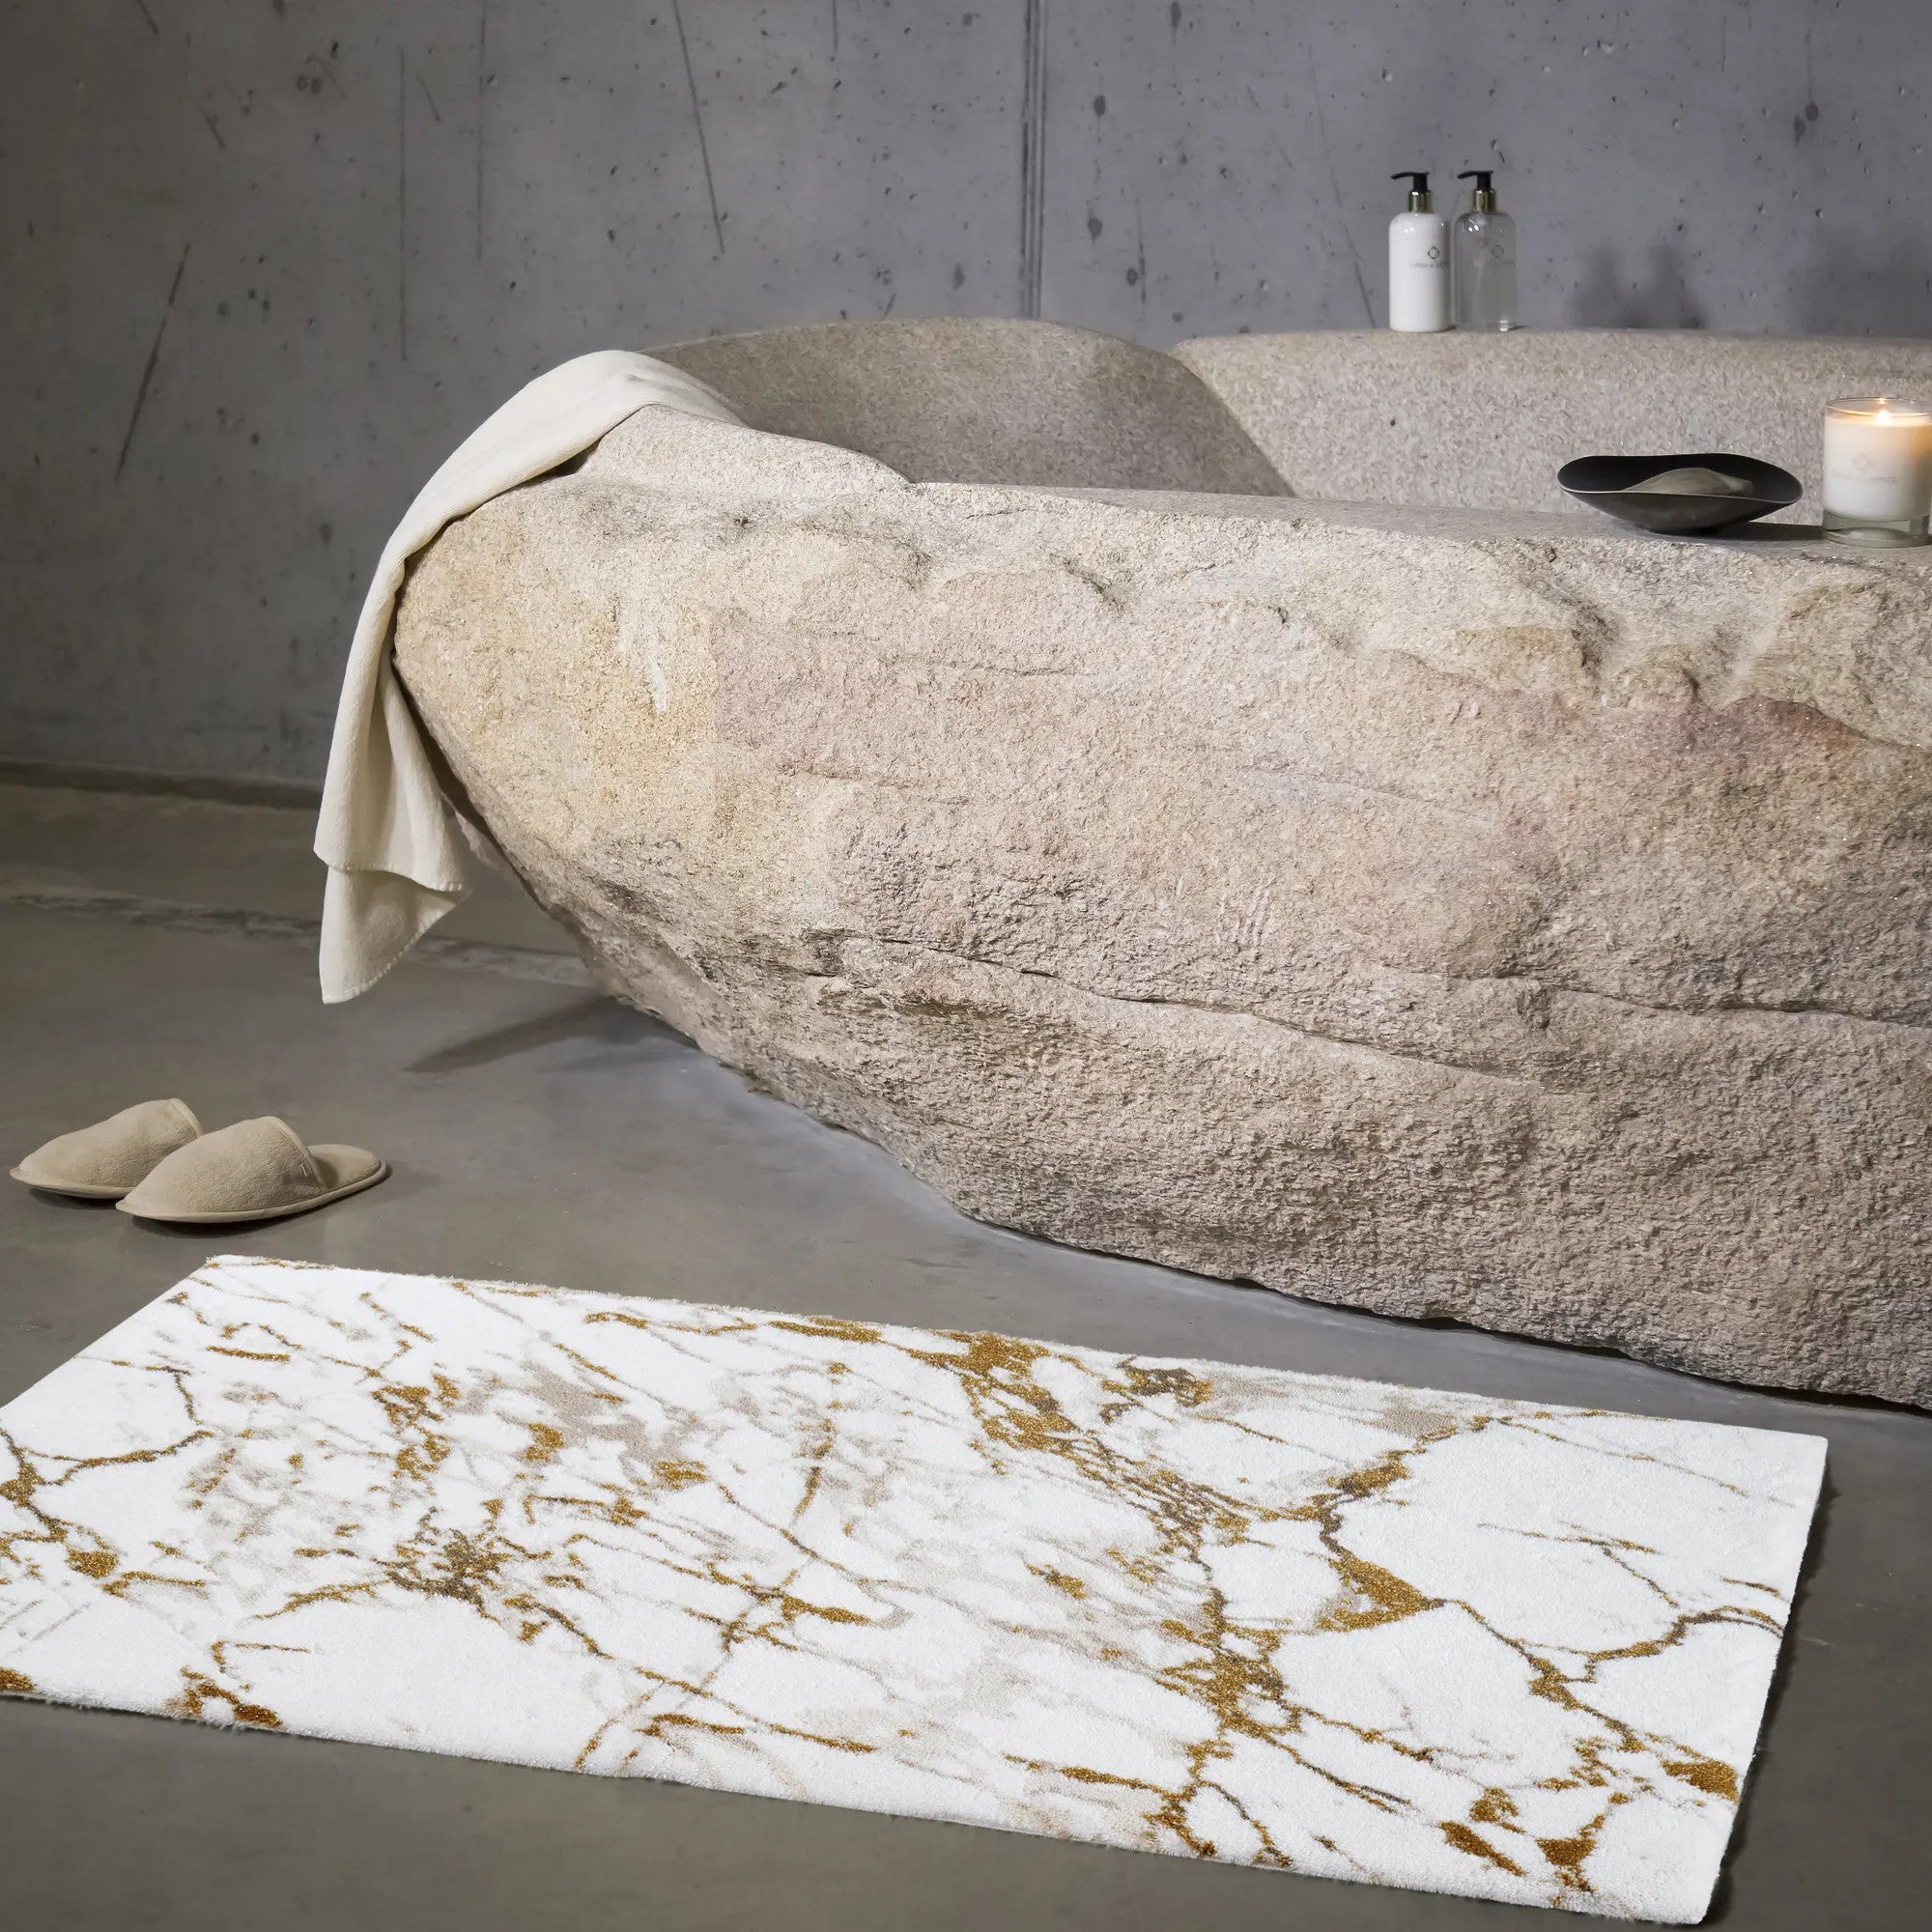 Luxury Bath Mats and High End Rugs